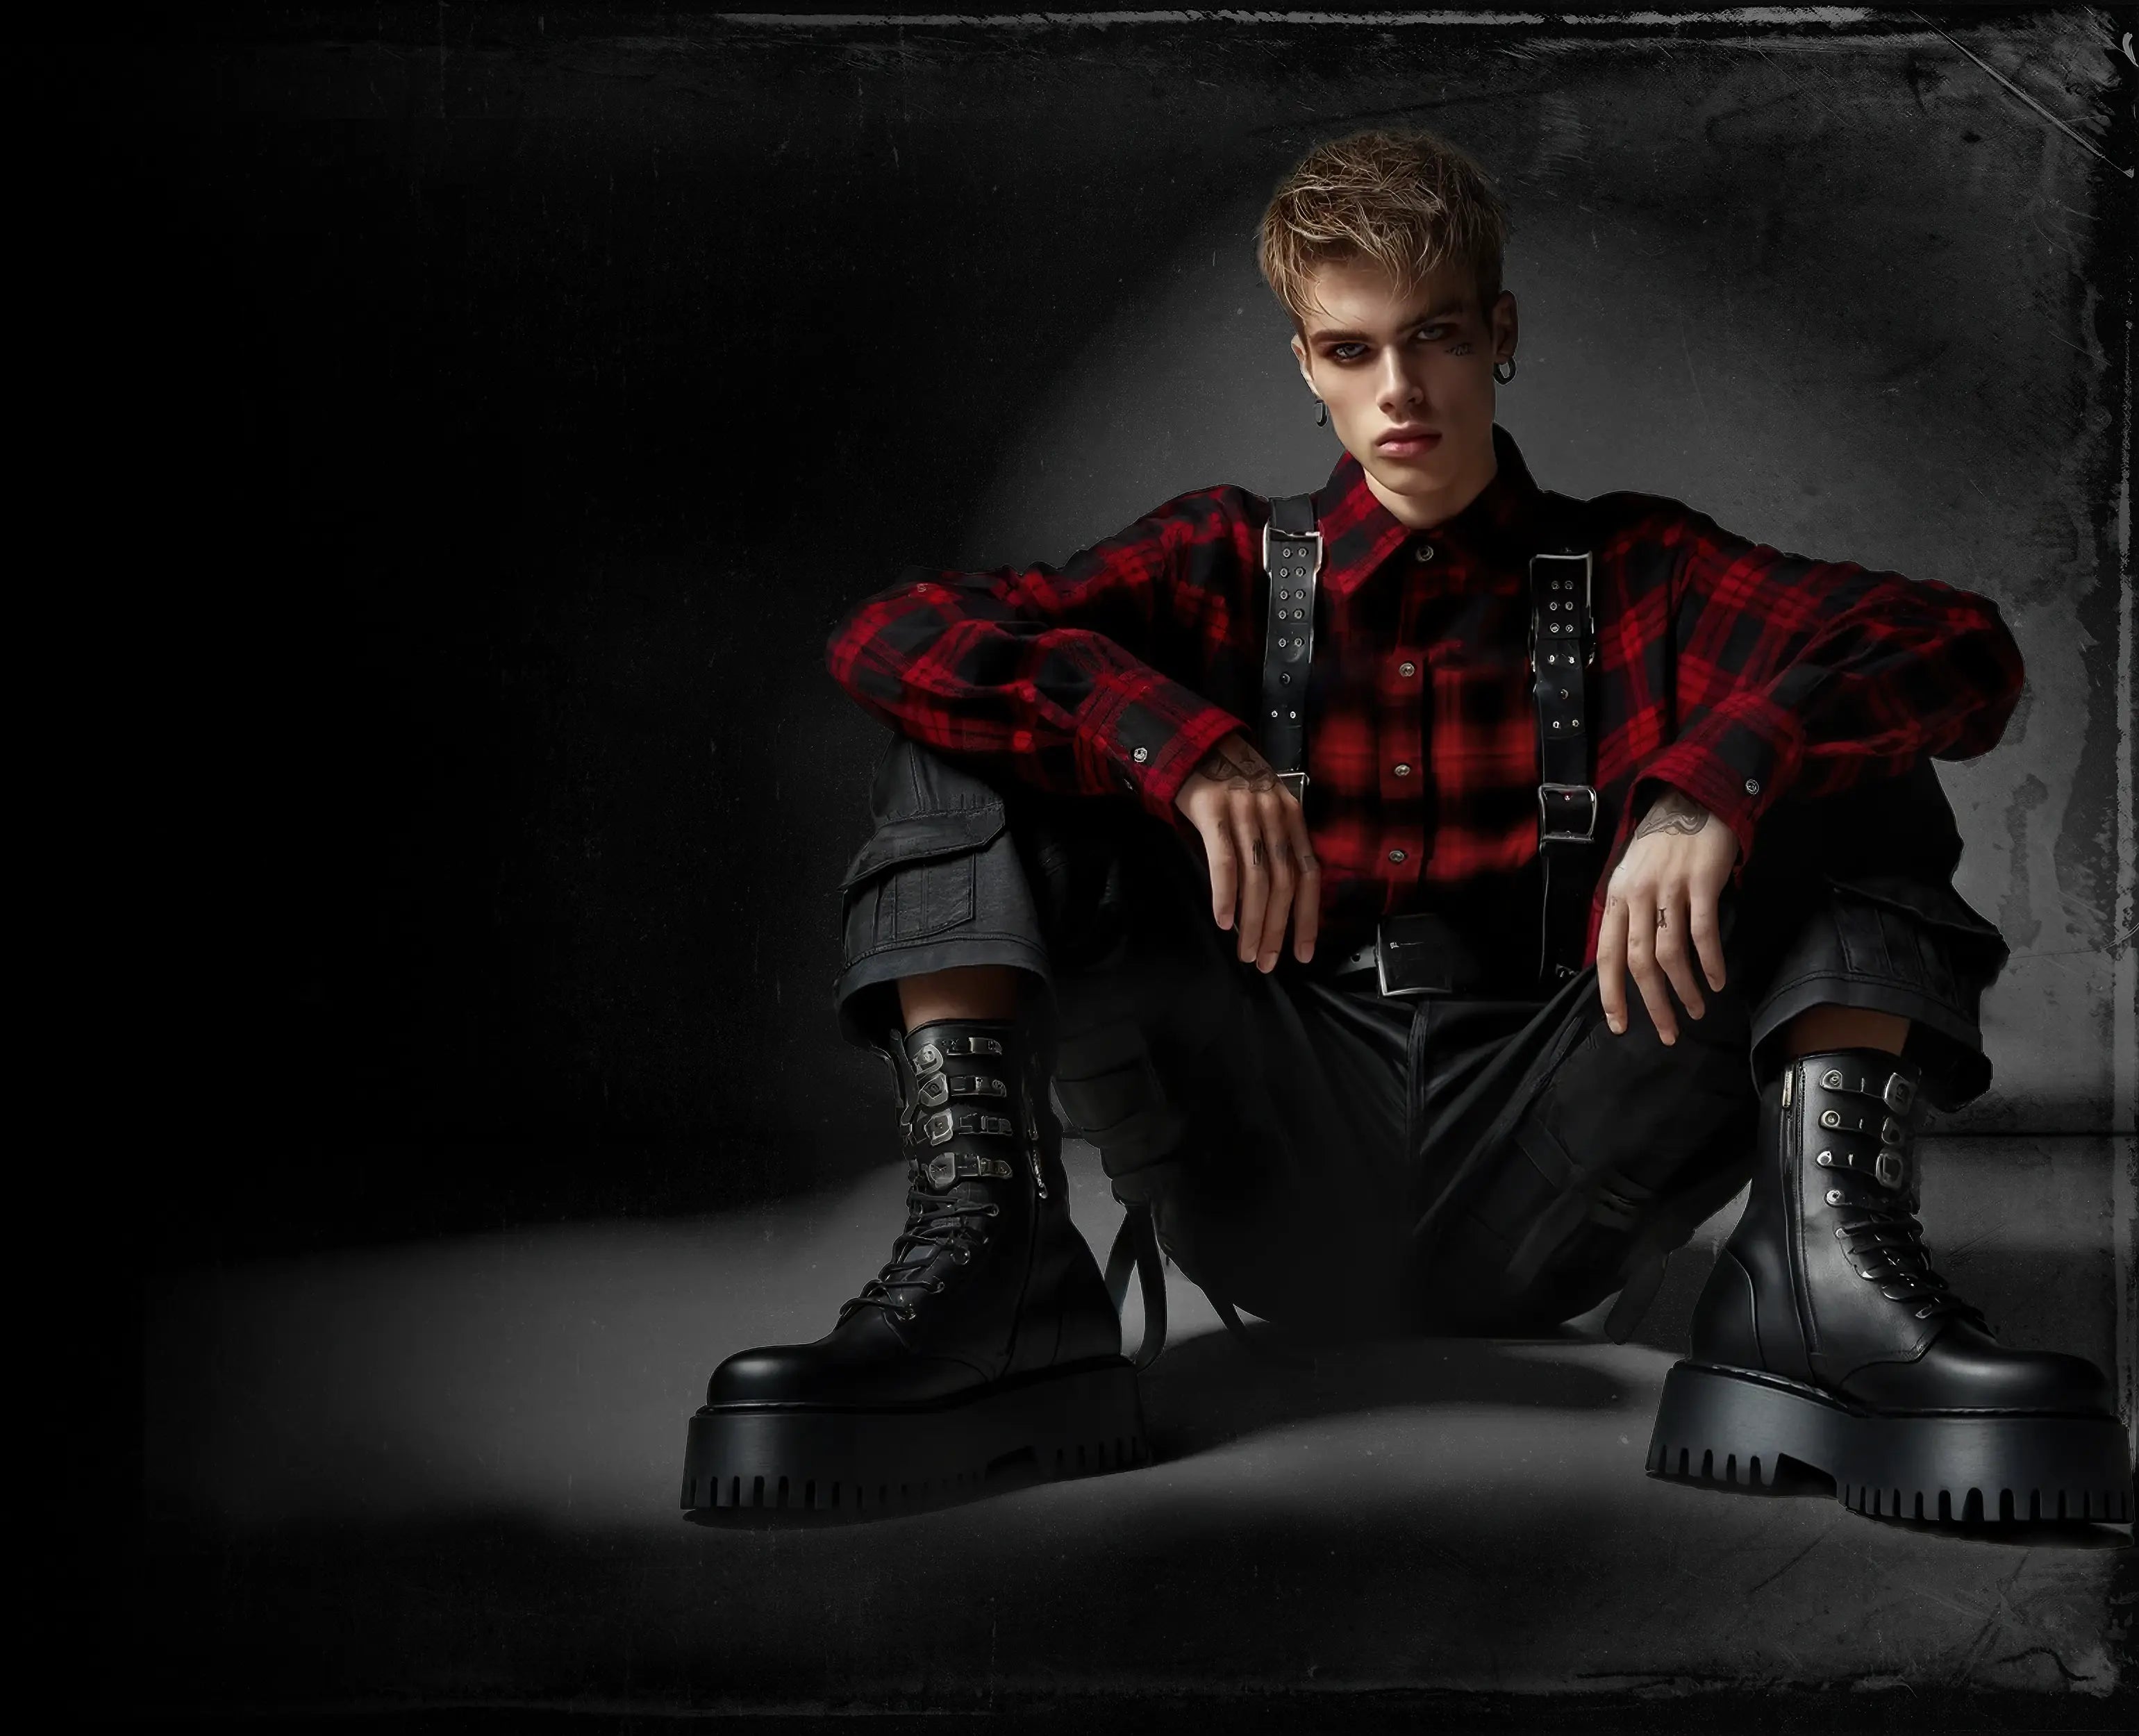 Sitting Punk Style Man in Red Plaid Shirt and Black Boots